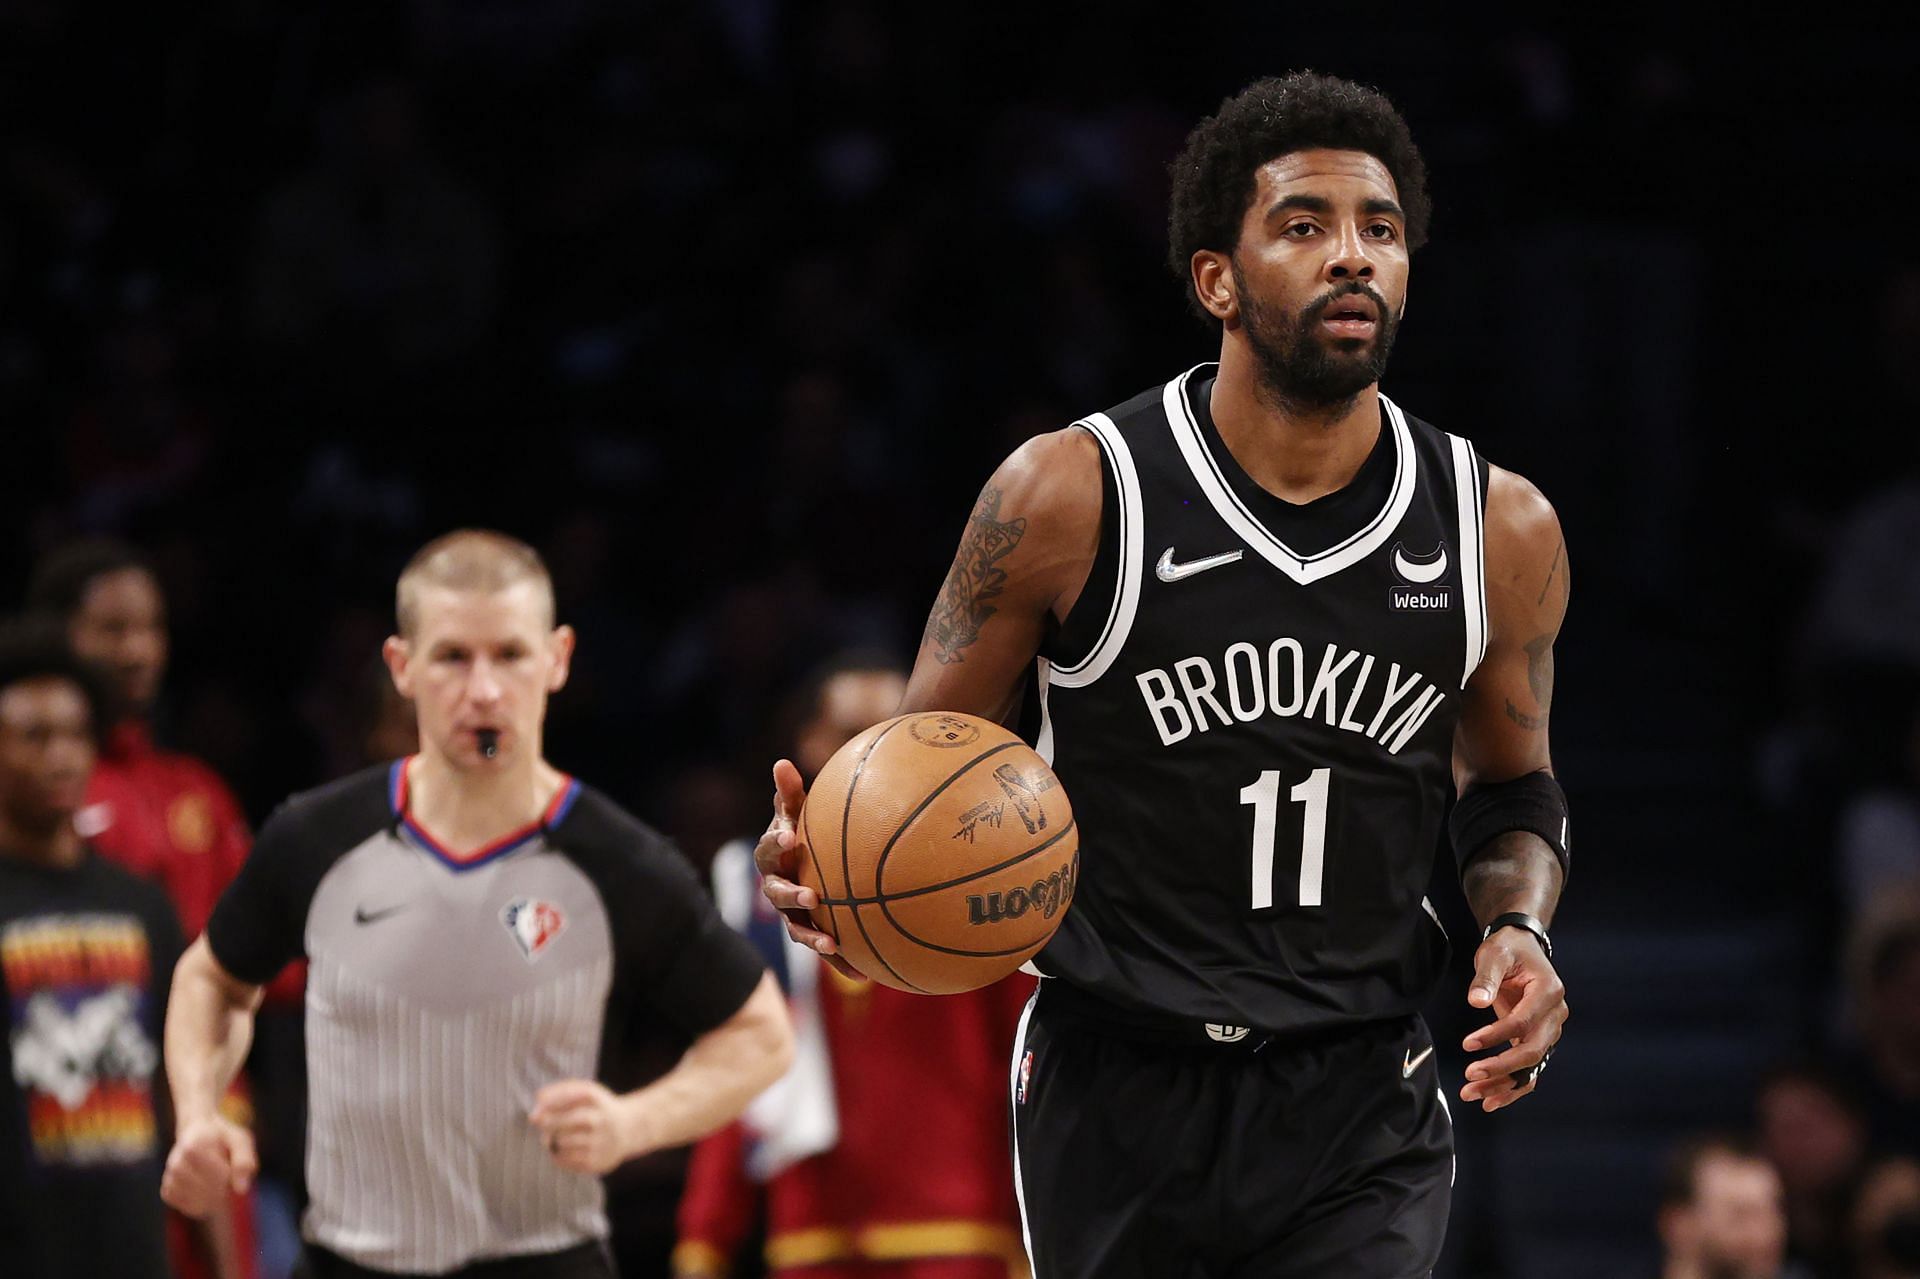 Kyrie Irving #11 of the Brooklyn Nets dribbles during the first half of the Eastern Conference 2022 Play-In Tournament against the Cleveland Cavaliers at Barclays Center on April 12, 2022 in the Brooklyn borough of New York City.